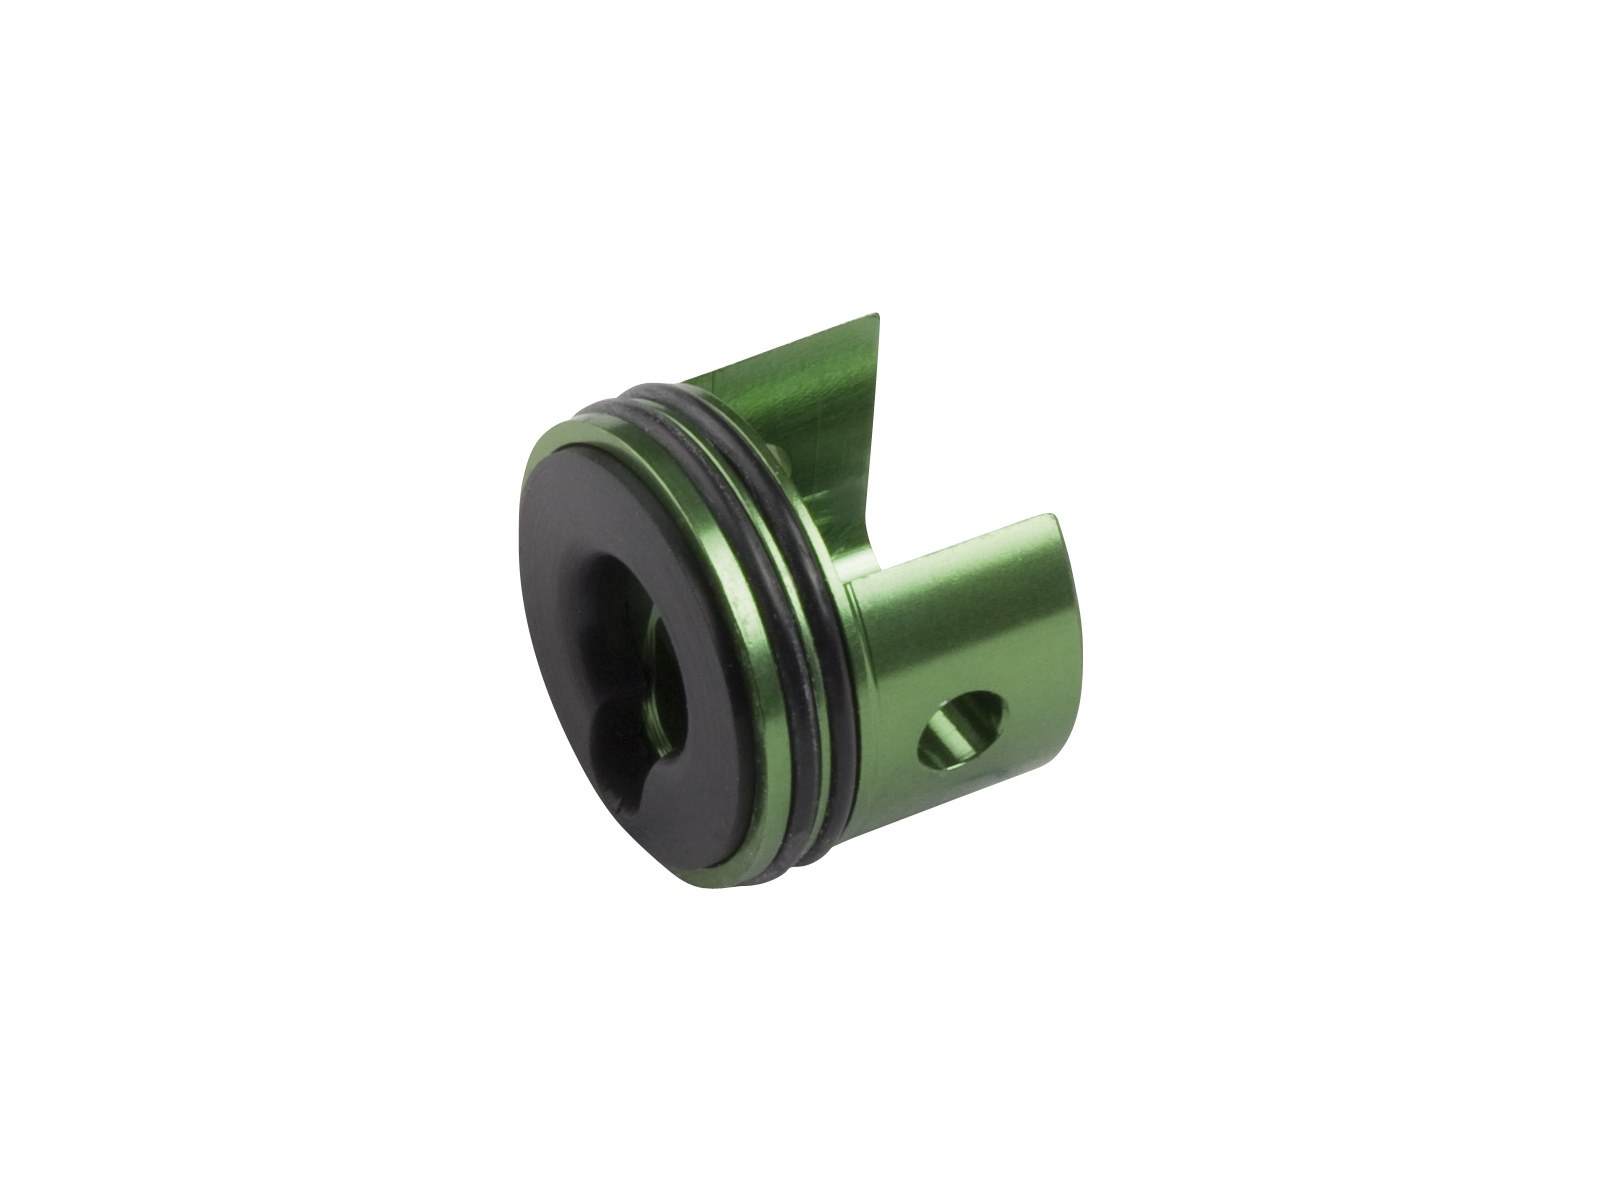 ASG Ultimate Aluminum Zylinder head Version 6 - Green